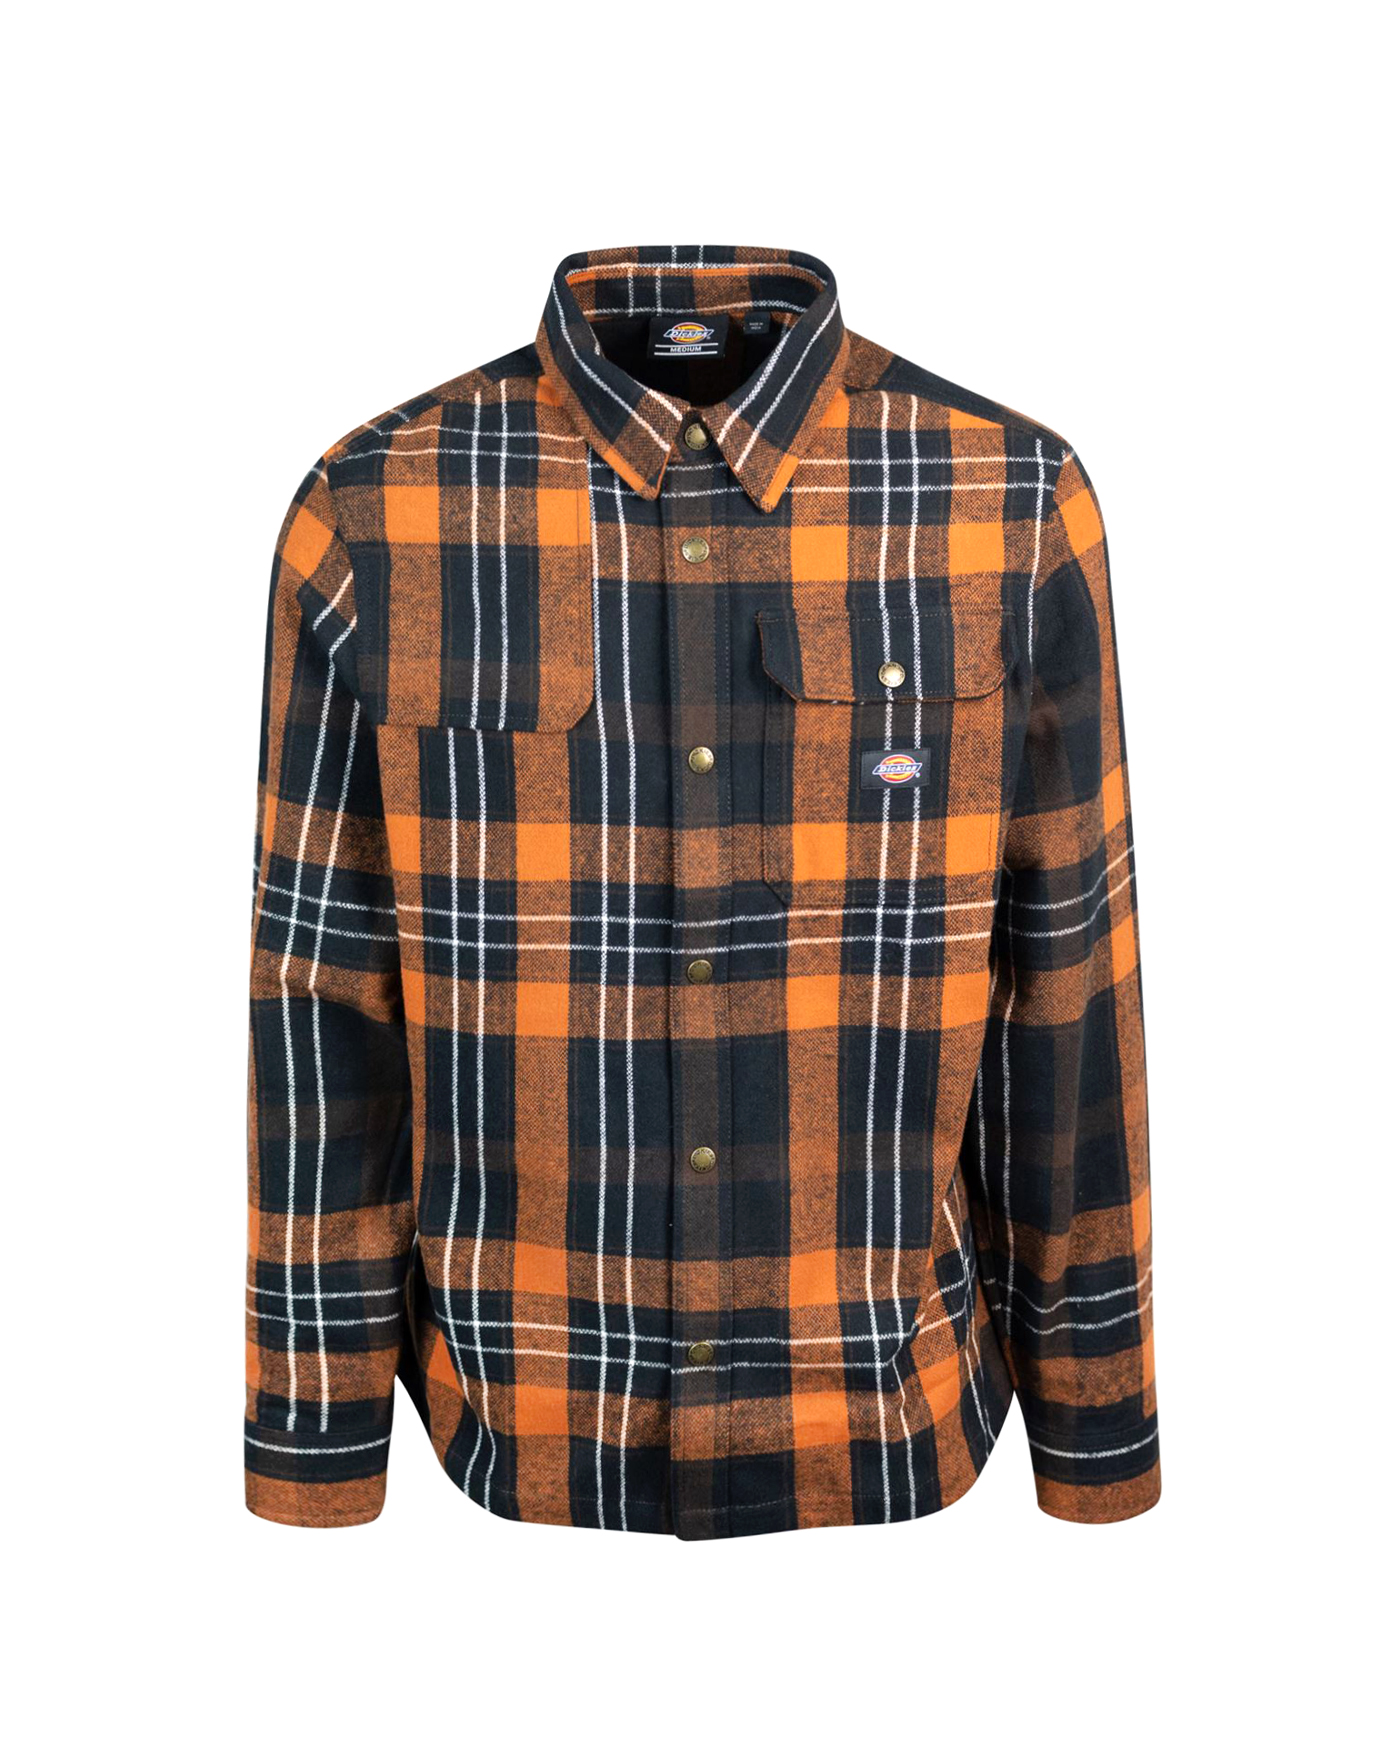 Dickies Nimmons Check Print Cotton Shirt In Dkd771